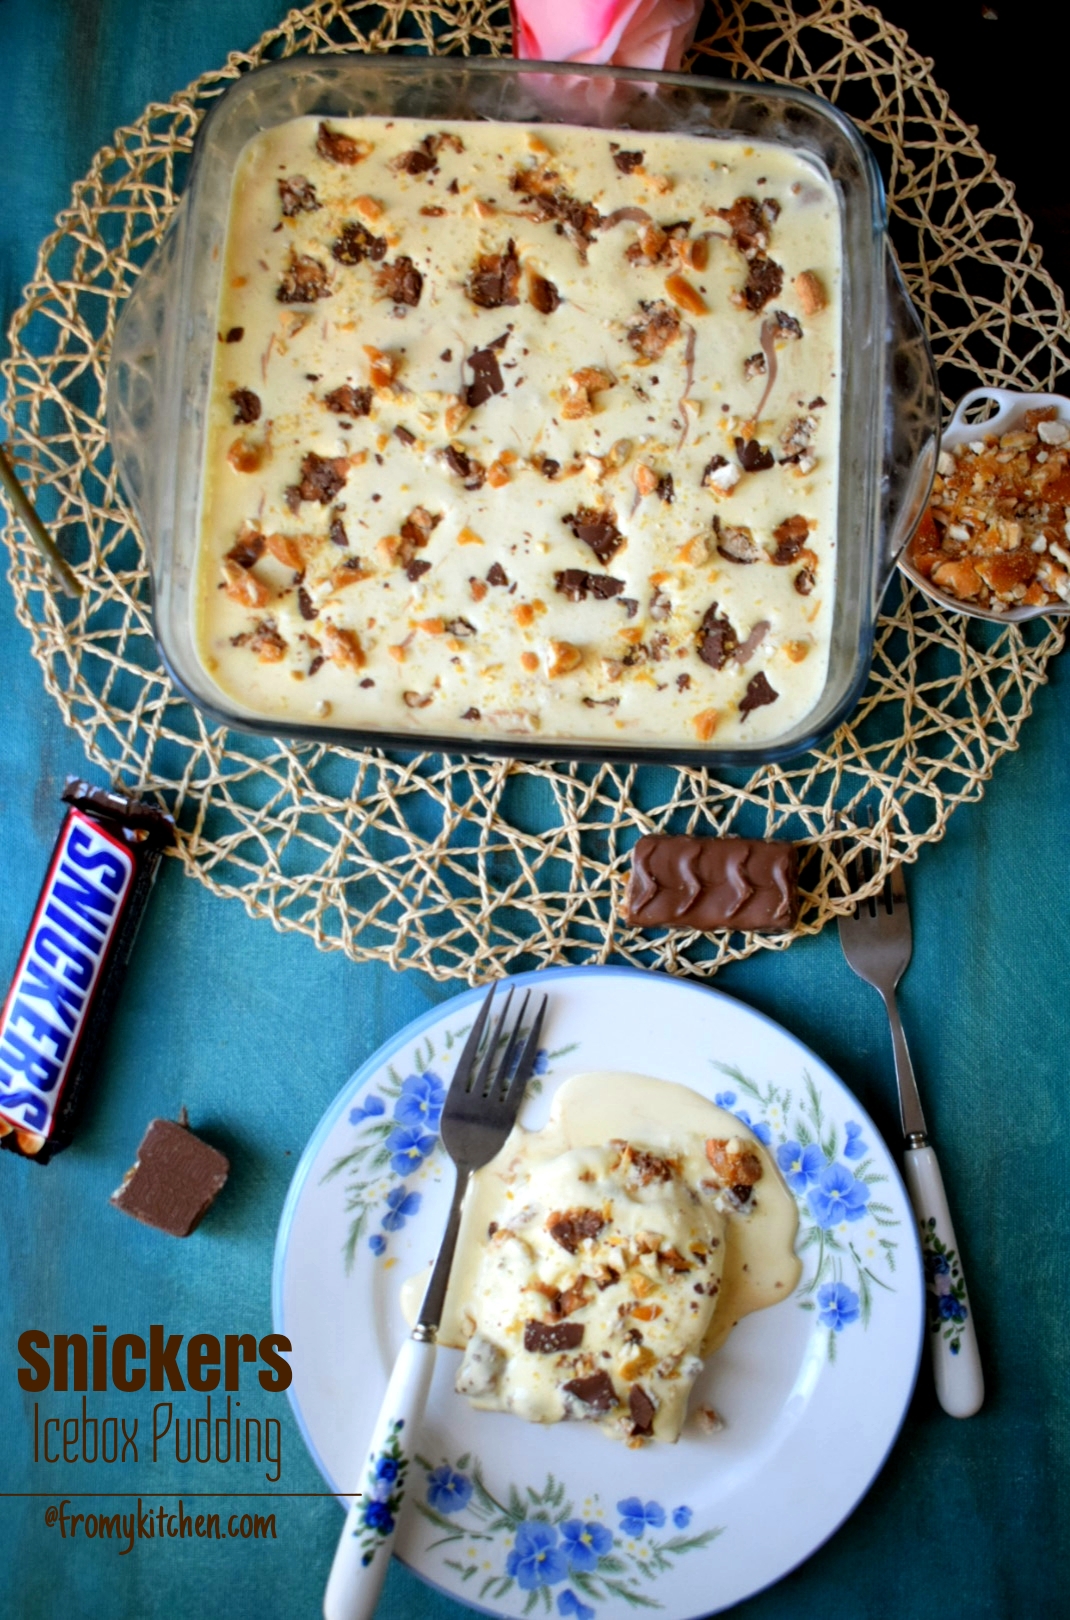 Snickers Icebox Pudding